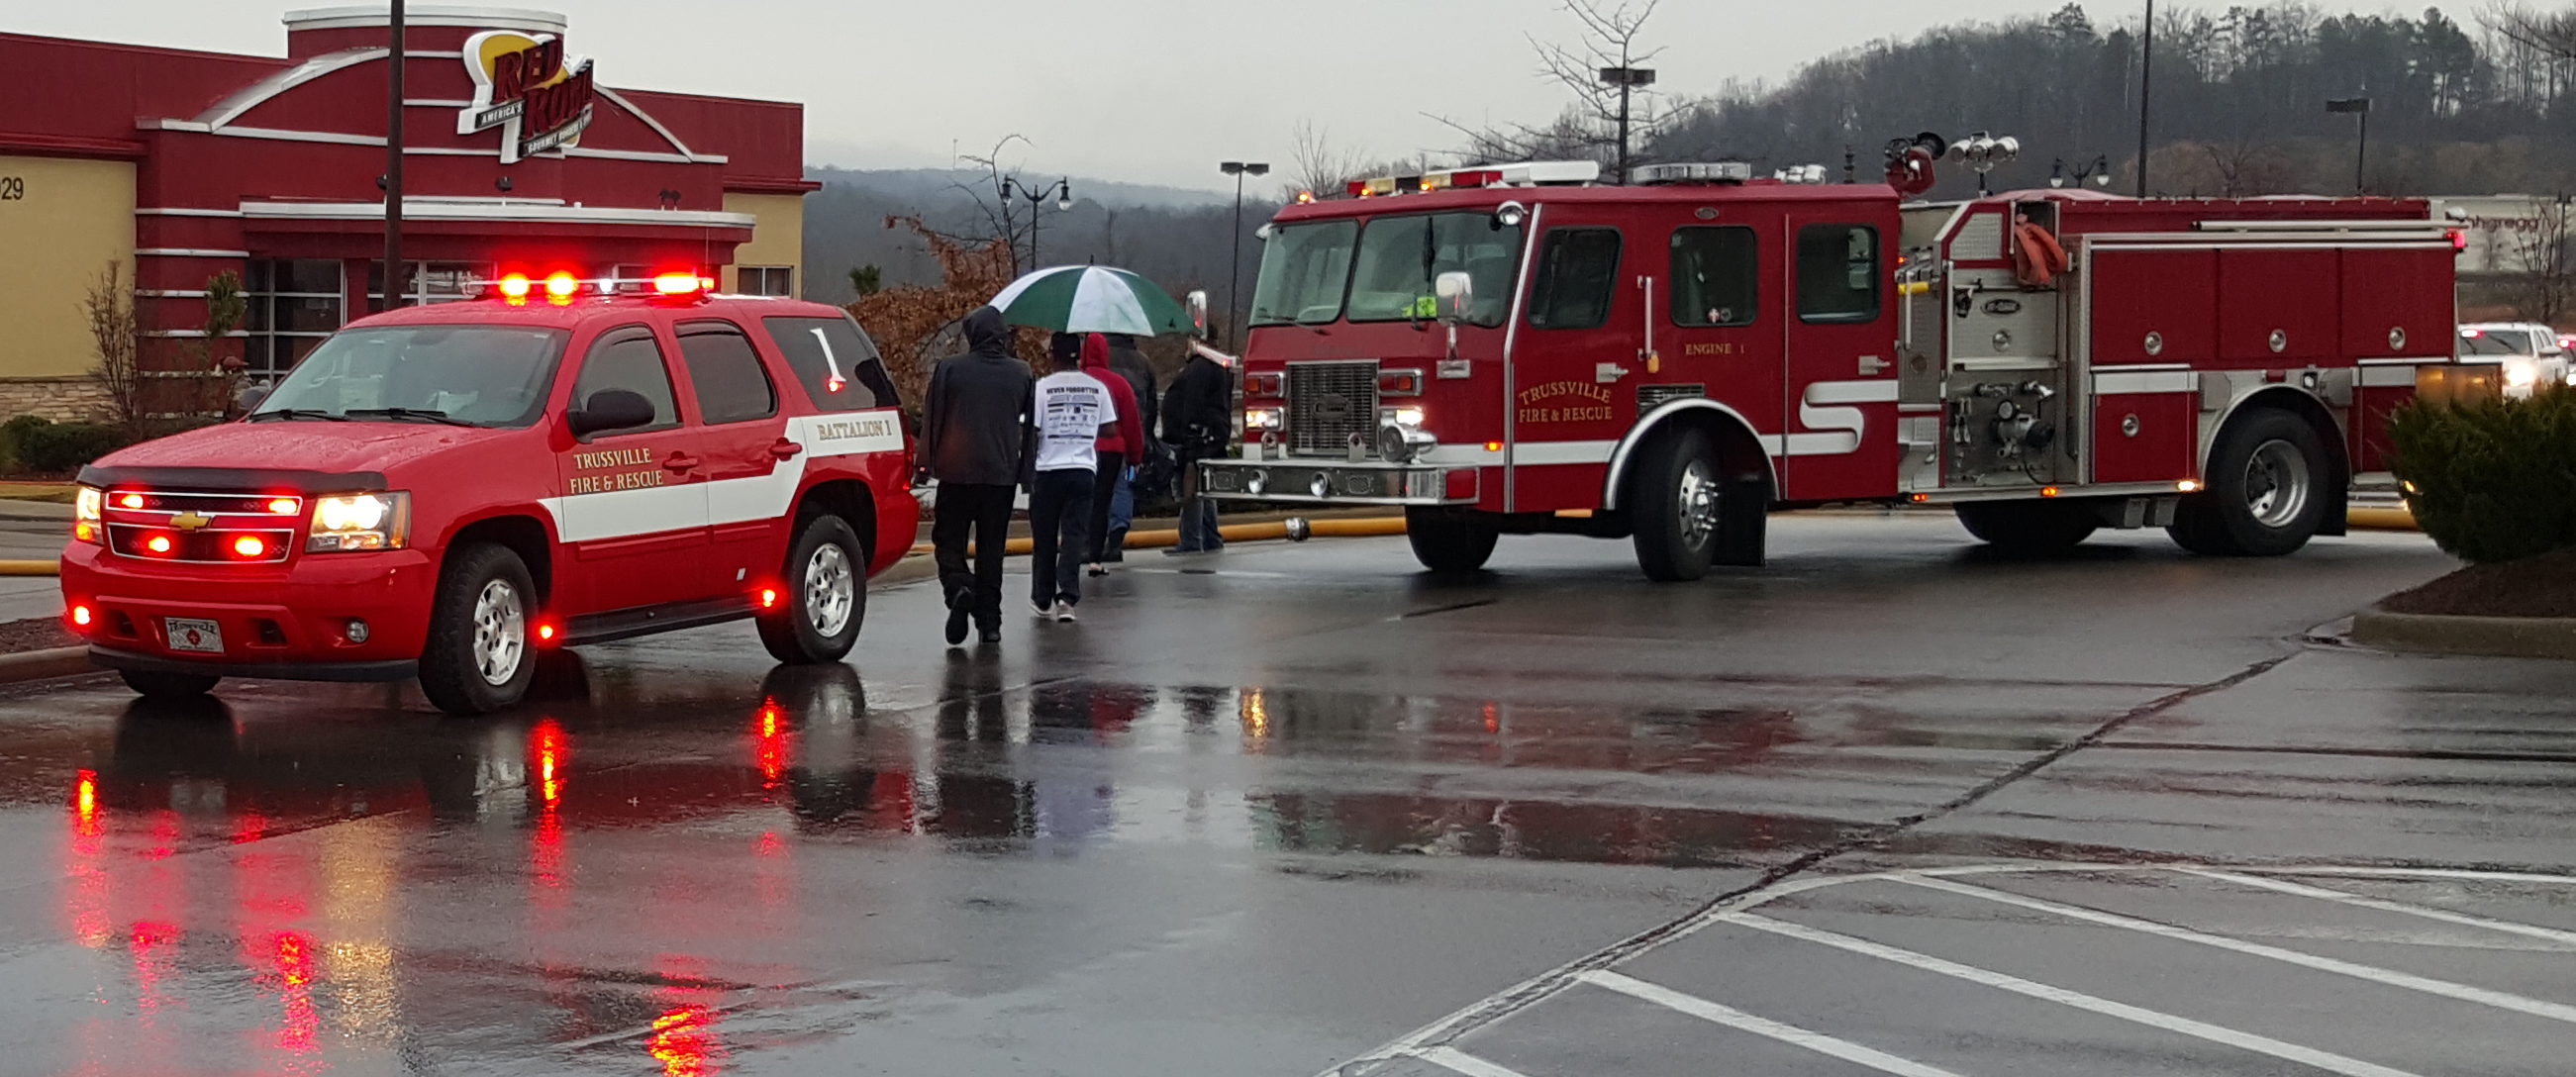 No injuries in Red Robin fire